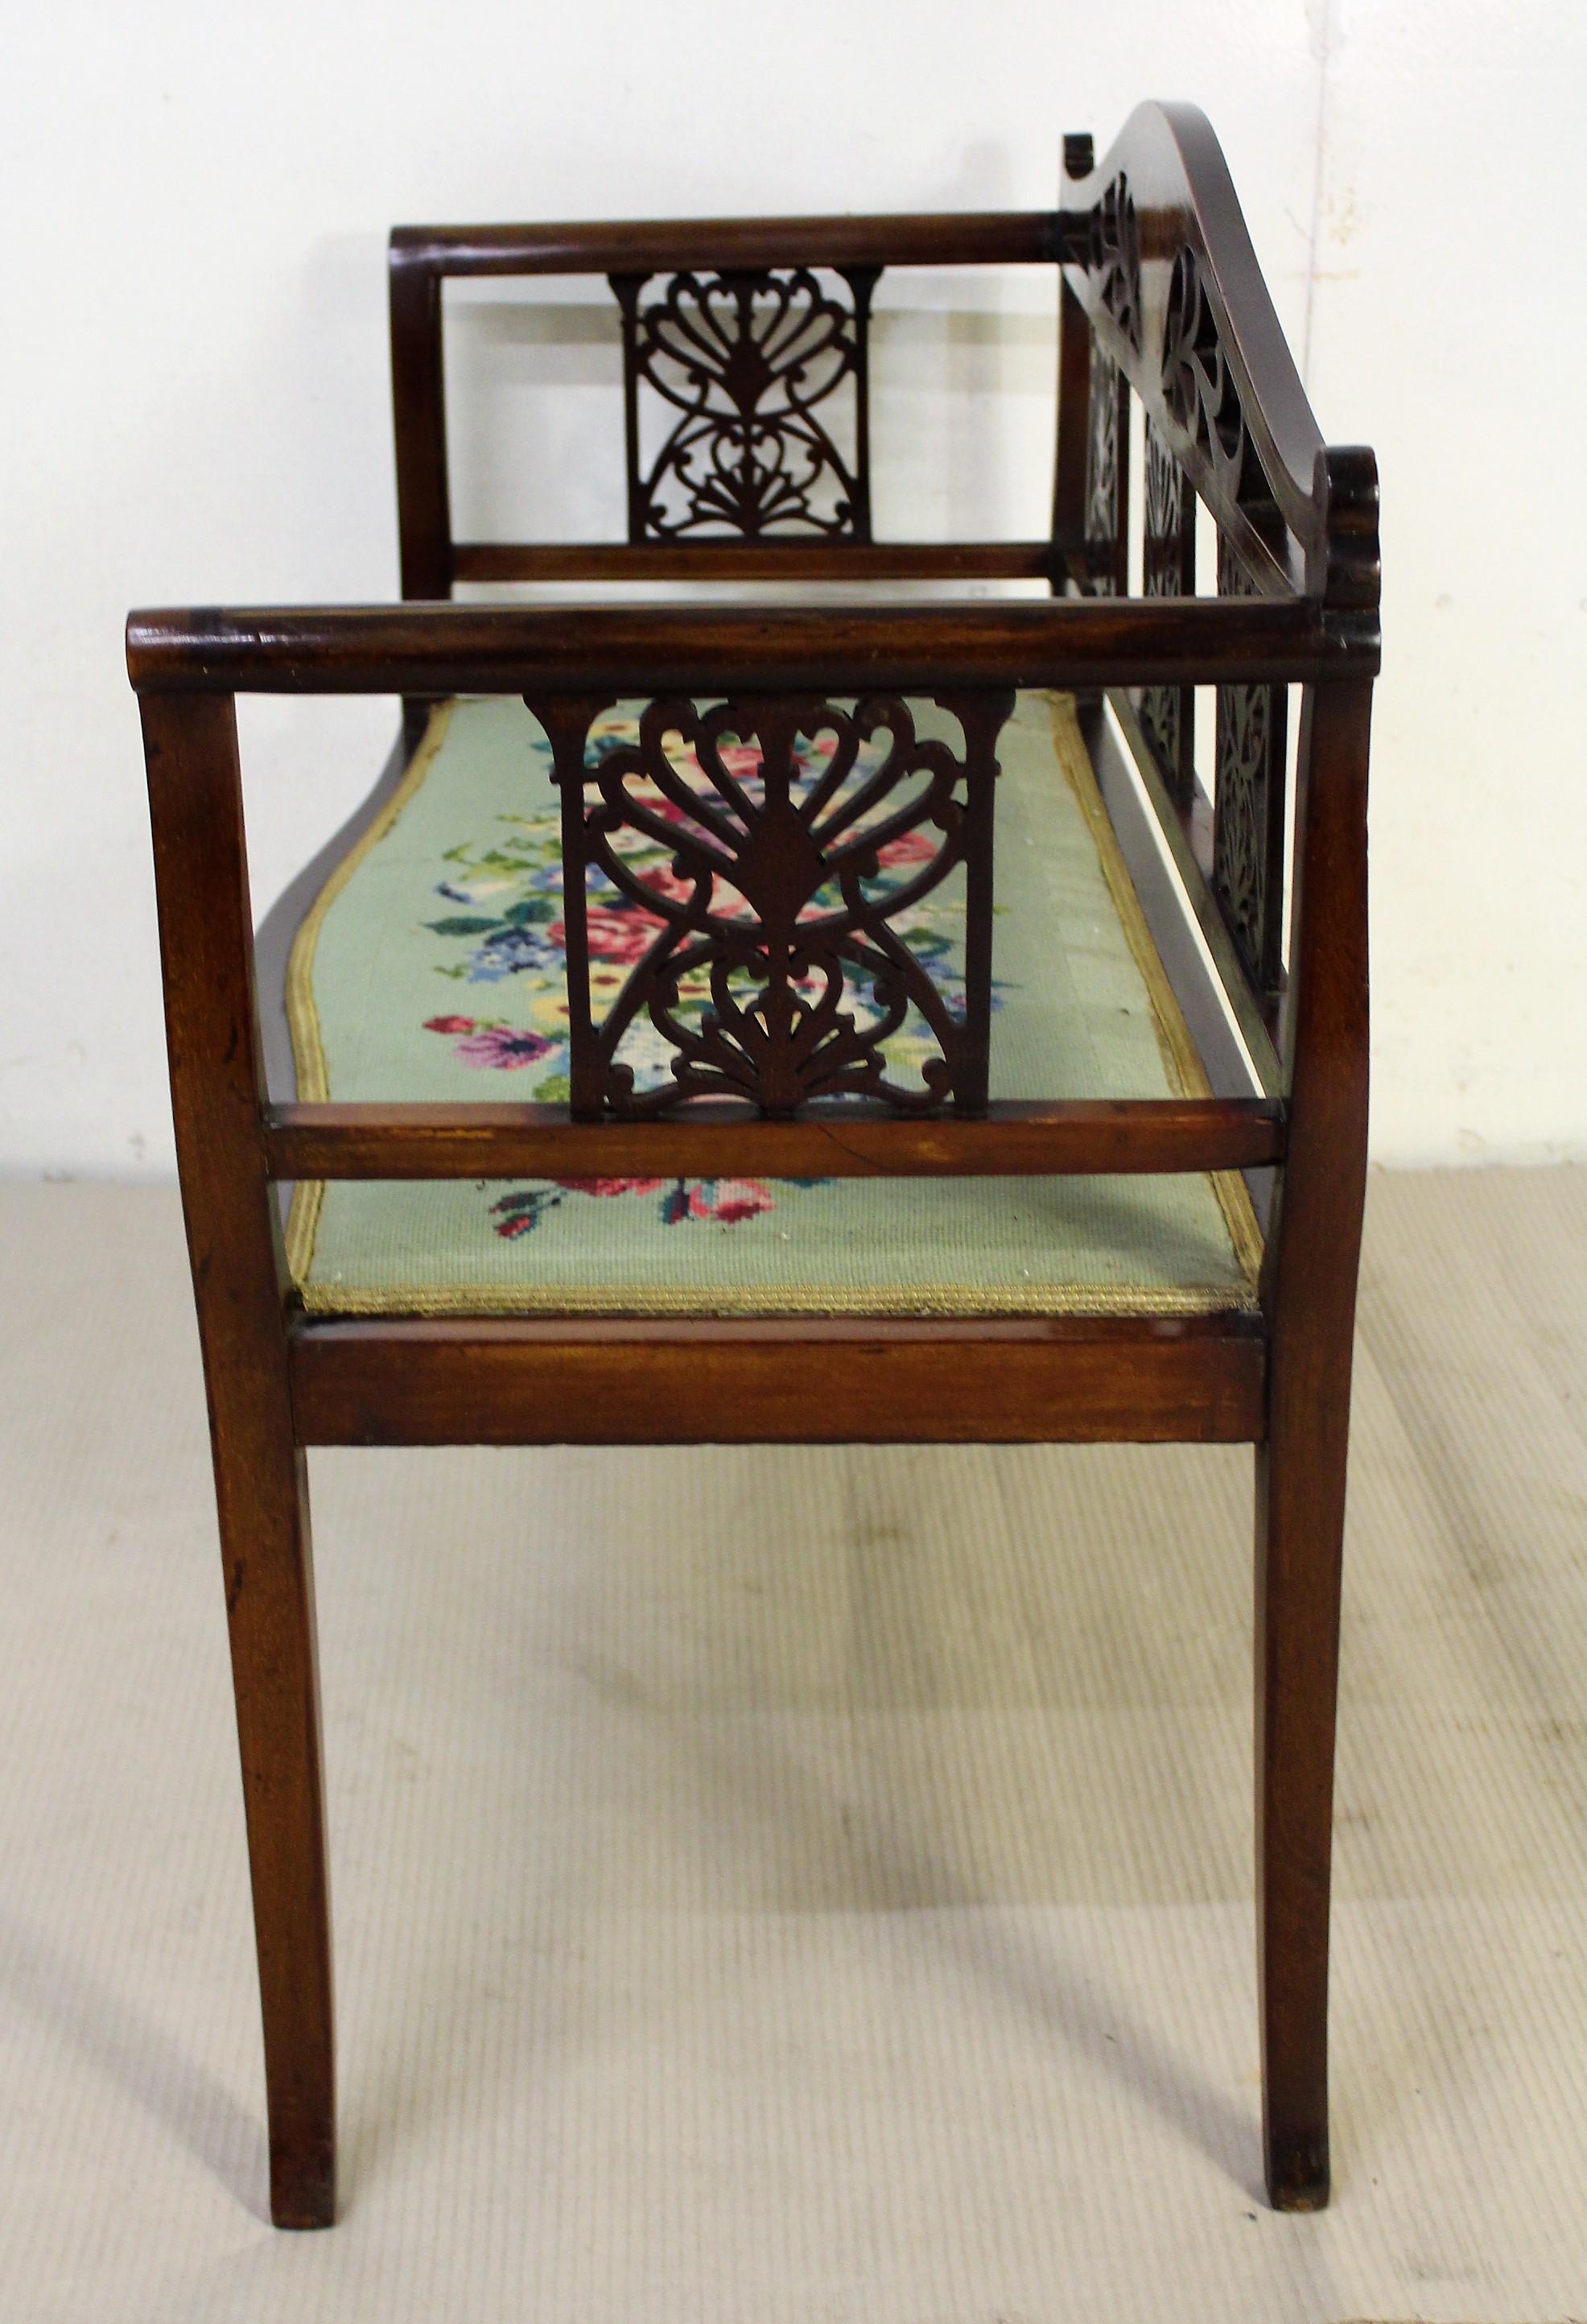 English Edwardian Period Inlaid Mahogany Settee or Bench For Sale 5